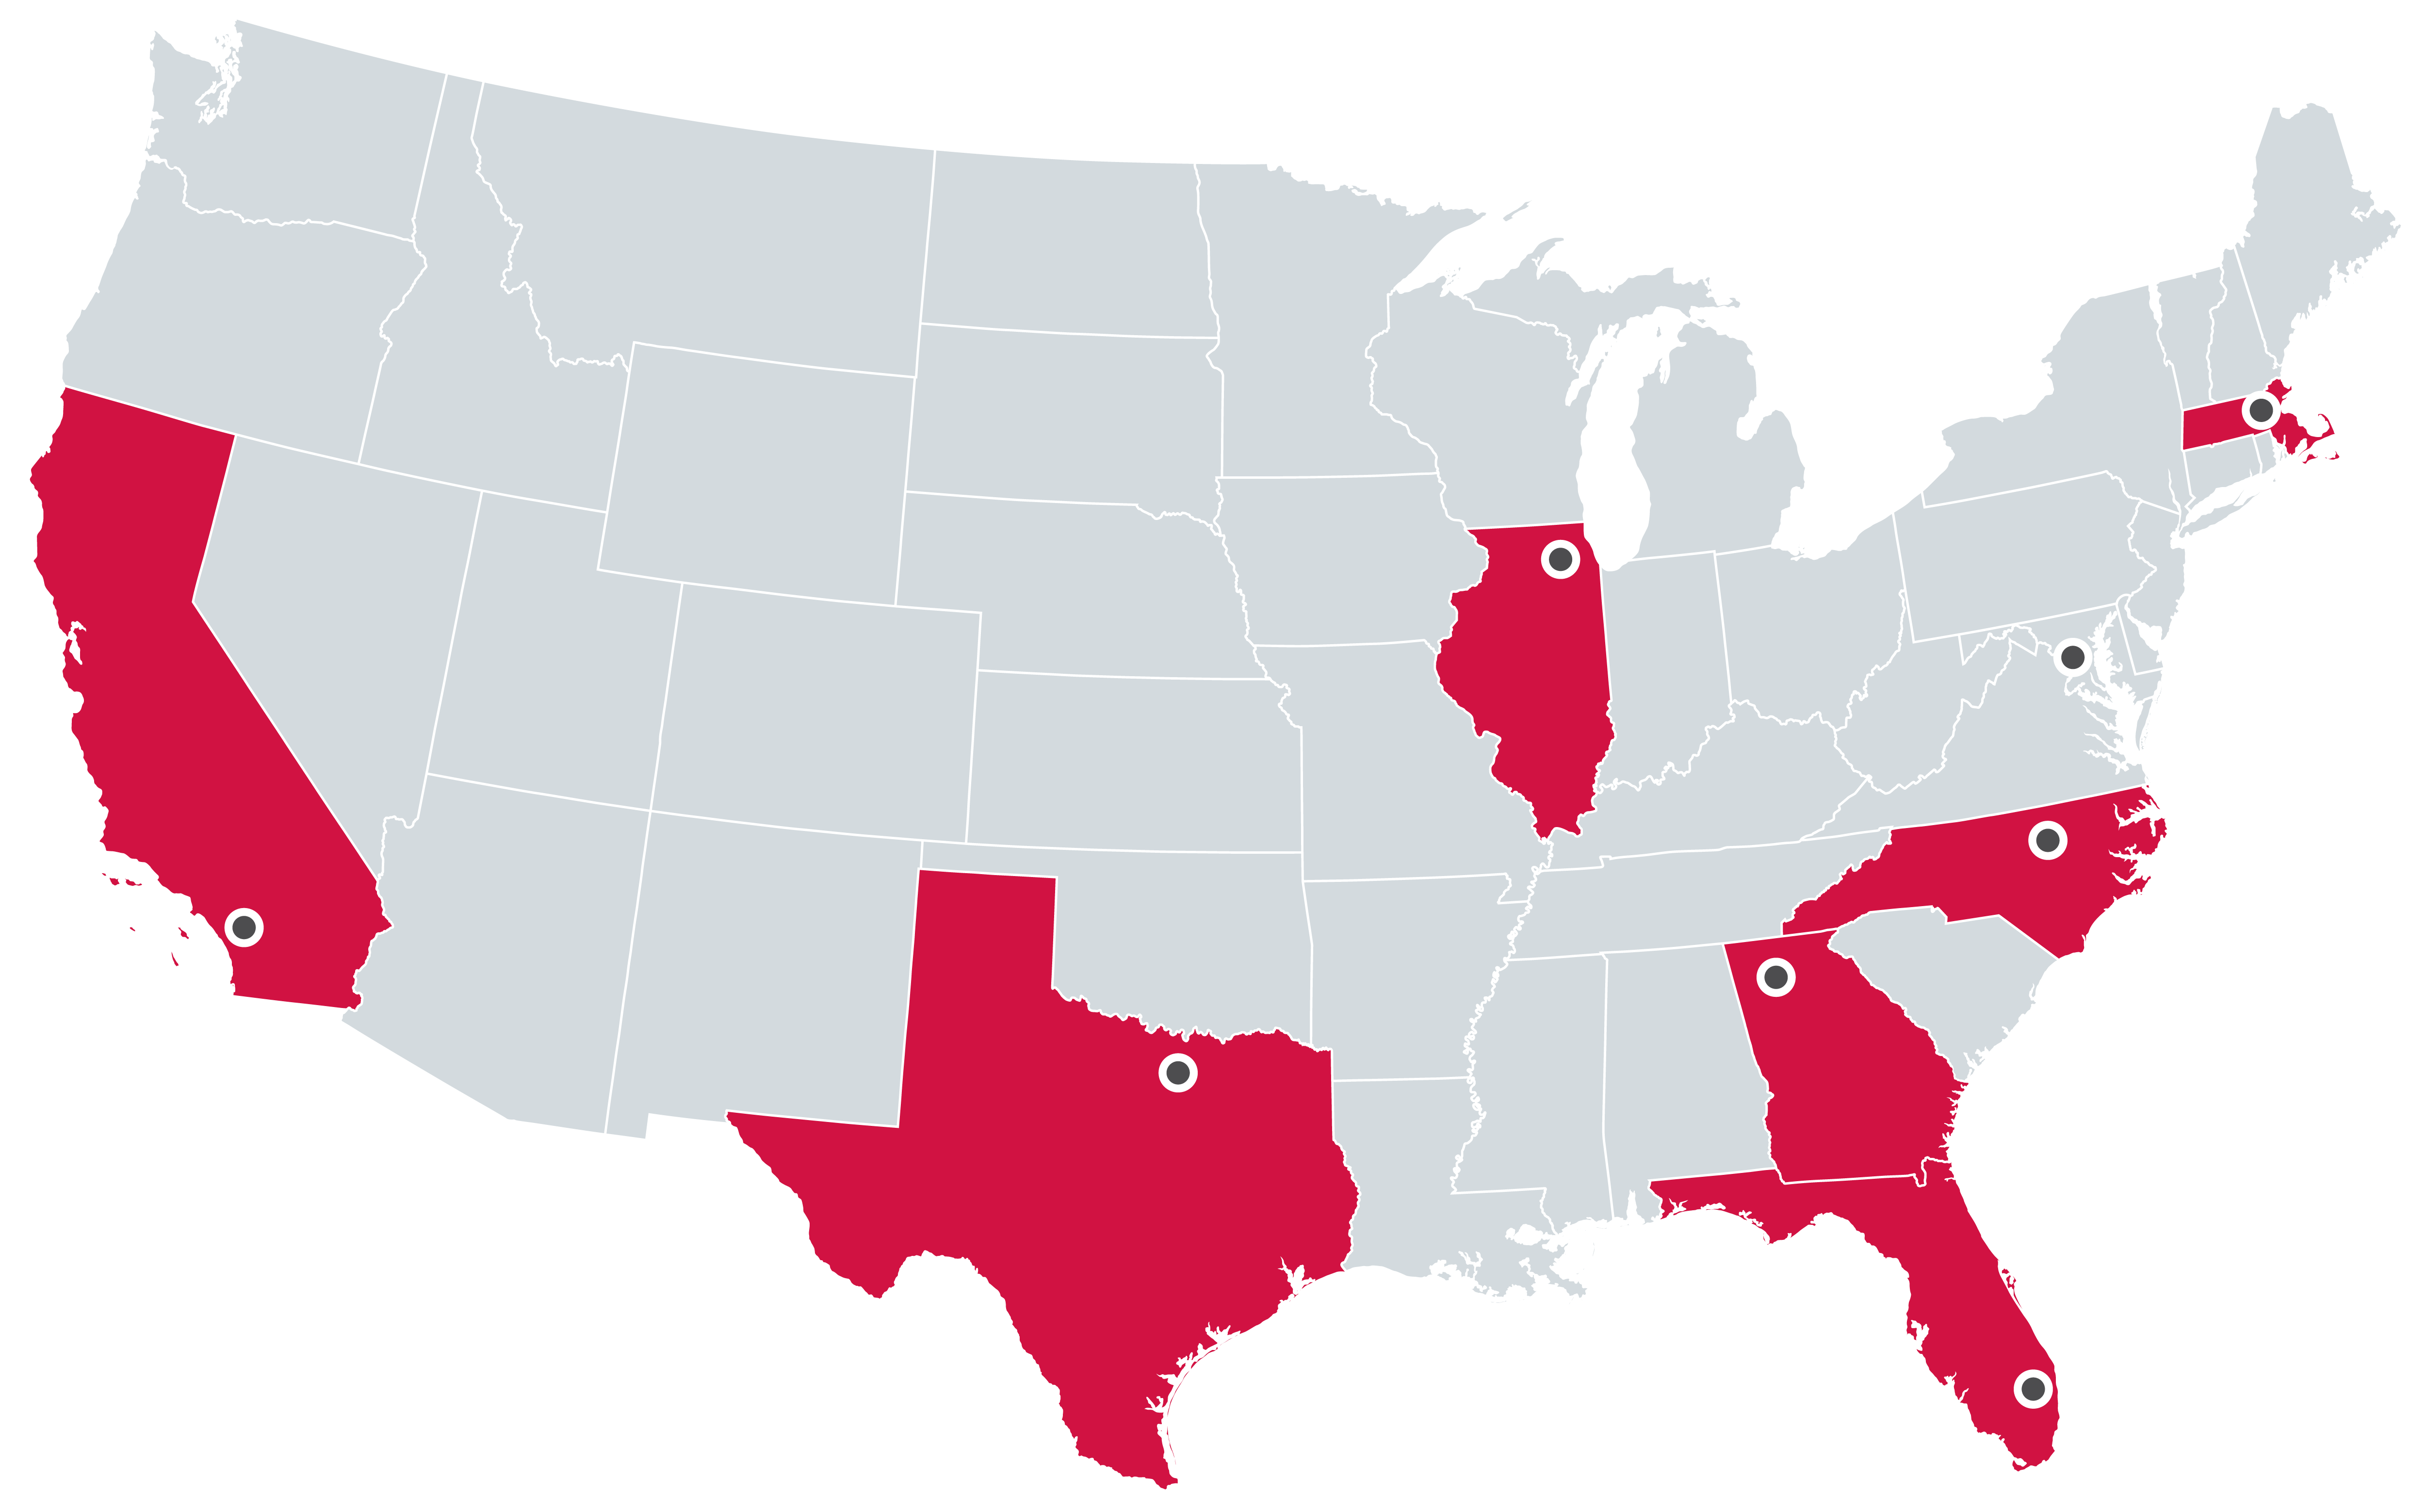 American Tower U.S. Office Locations